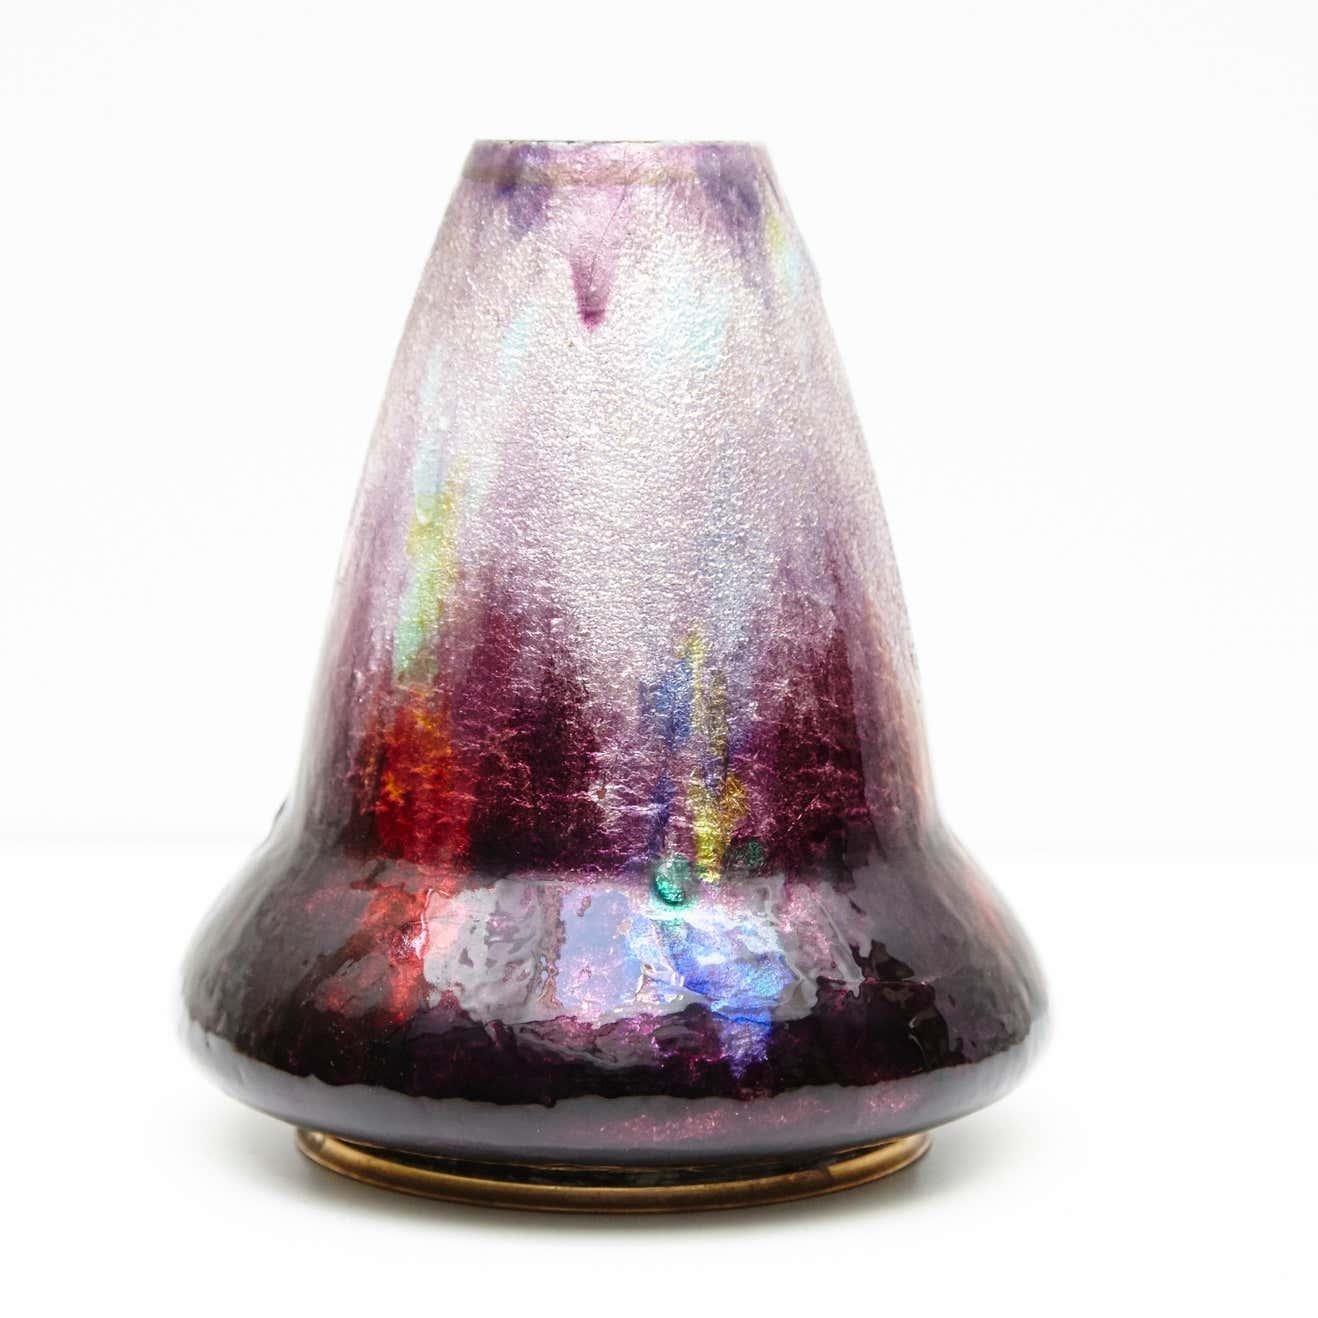 Embrace the elegance of Art Deco with this striking Limoges glass vase by renowned French artist Alexandre Marty. Manufactured circa 1920 in France, this exquisite piece embodies the sophistication and charm of the Art Deco era.

This unique vase is